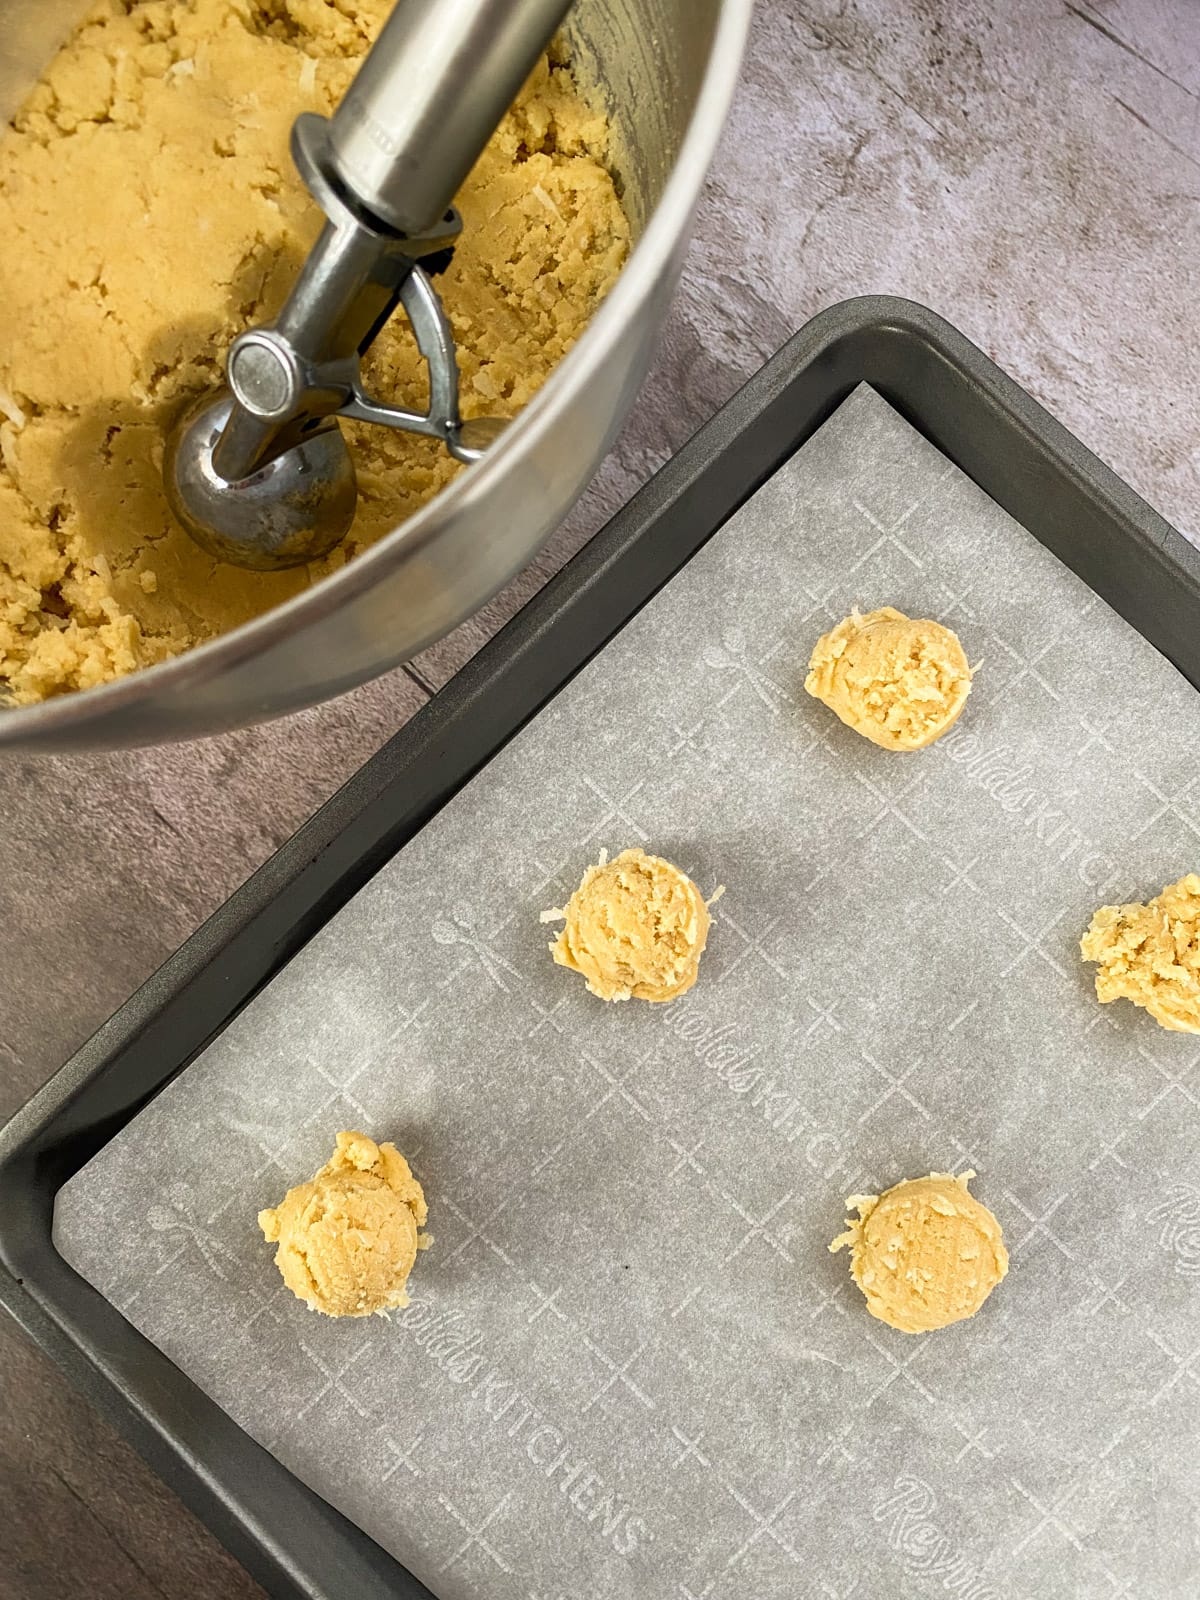 Scooping cookies from a mixing bowl onto a parchment paper lined baking sheet.